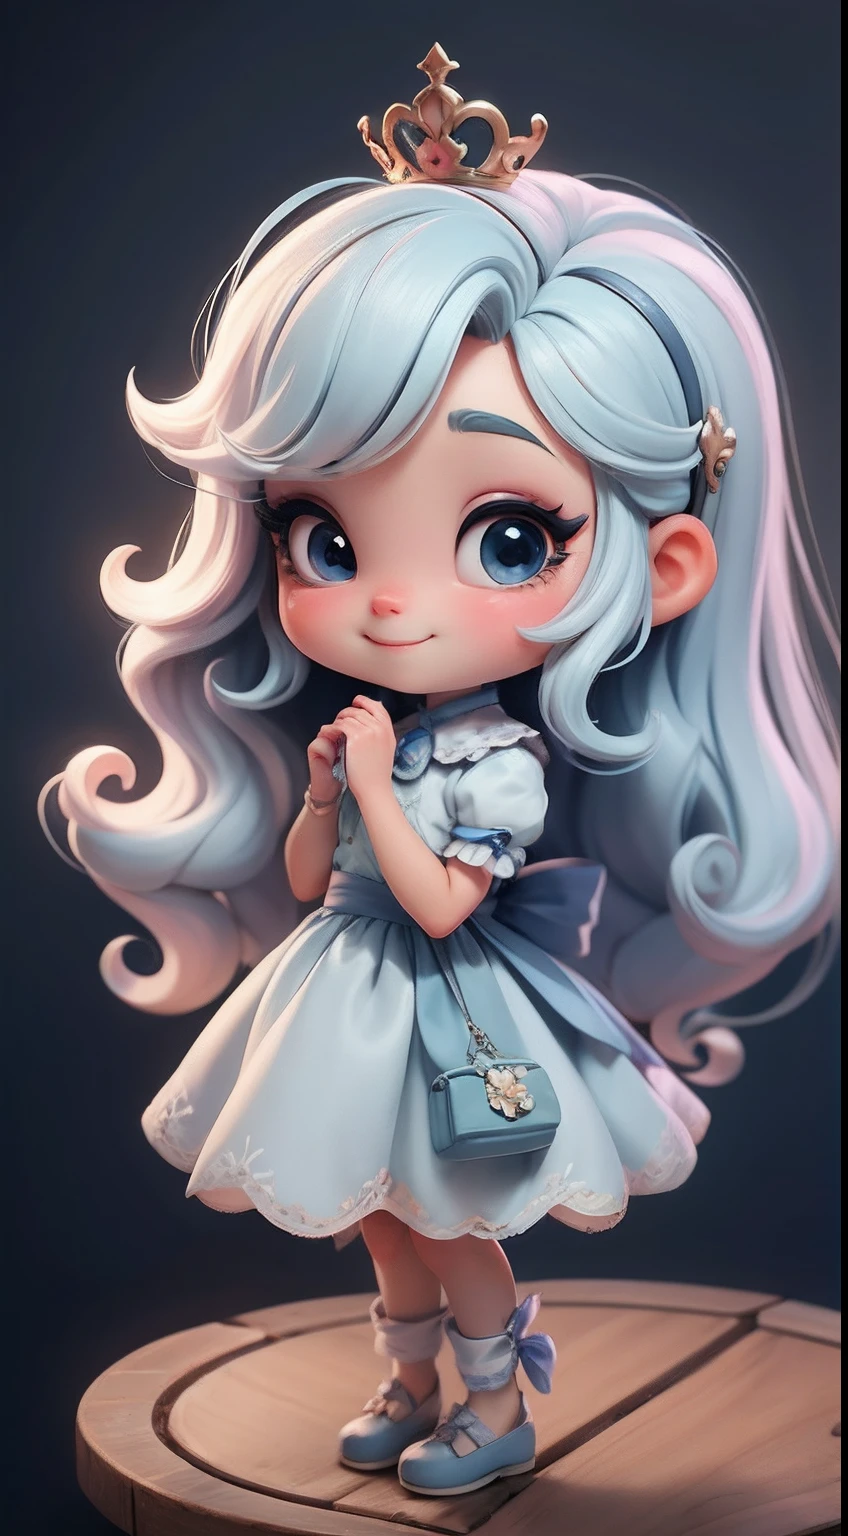 Create a  baby chibi version of the Alice character in an 8K resolution.

Boneca Chibi Alice: She should look adorable and cute, Keeping the iconic elements of the original character. A Alice chibi deve ter um rosto redondo com olhos grandes e brilhantes, long eyelashes and rosy cheeks. Seus cabelos devem ser curtos e em tons vibrantes de loiro ou castanho claro.

Vestido encantador: Vista a Alice chibi com um vestido fofo e elegante em tons de azul, rosa ou branco. O vestido pode ter babados, lace and details that refer to the theme of Wonderland. Add loops or ribbons to add a touch of delicacy.

Avental e Arco: Acrescente um avental branco sobre o vestido da Alice chibi, tied at the waist with a delicate bow. O avental pode ter pequenos detalhes como bolsos ou bordados sutis.

Meias e Sapatos Fofos: Complete o visual da Alice chibi com meias listradas em azul e branco ou com detalhes divertidos. On the feet, coloque sapatos fofos de boneca, com amarras ou fivelas.

magical accessories: Add lovely accessories to Alice chibi, like a bow in the hair or a tiara with Wonderland-themed details. You can also include cute theme accessories in your hands.

Certifique-se de adicionar sombras, texturas e detalhes nos cabelos, Alice chibi's clothes and accessories to make her even more adorable and charming. Give him a smiling expression and a sweet smile on his face, capturing the essence of the character in a delicate and charming way.